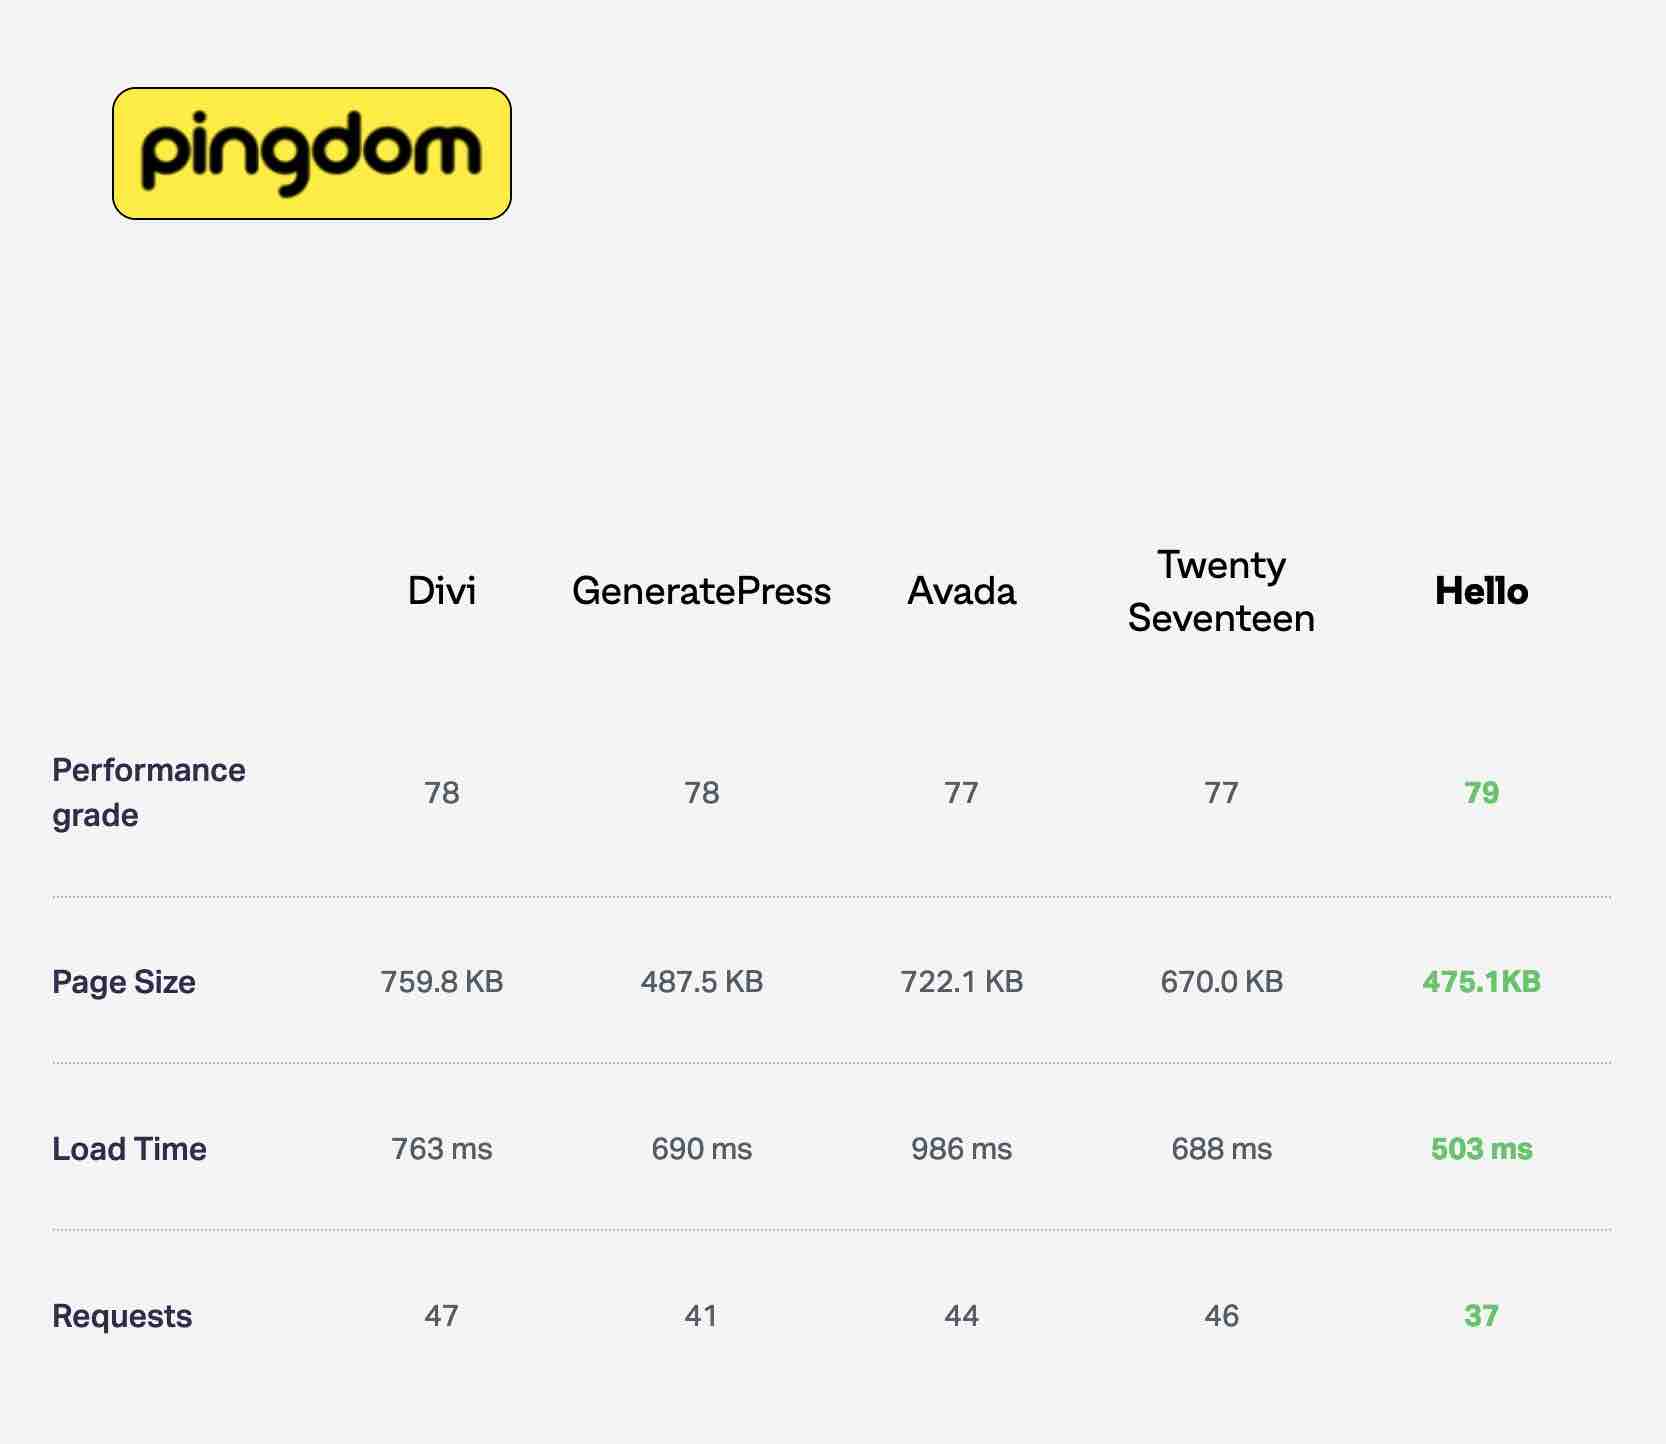 Pingdom test results of the Hello Elementor theme.